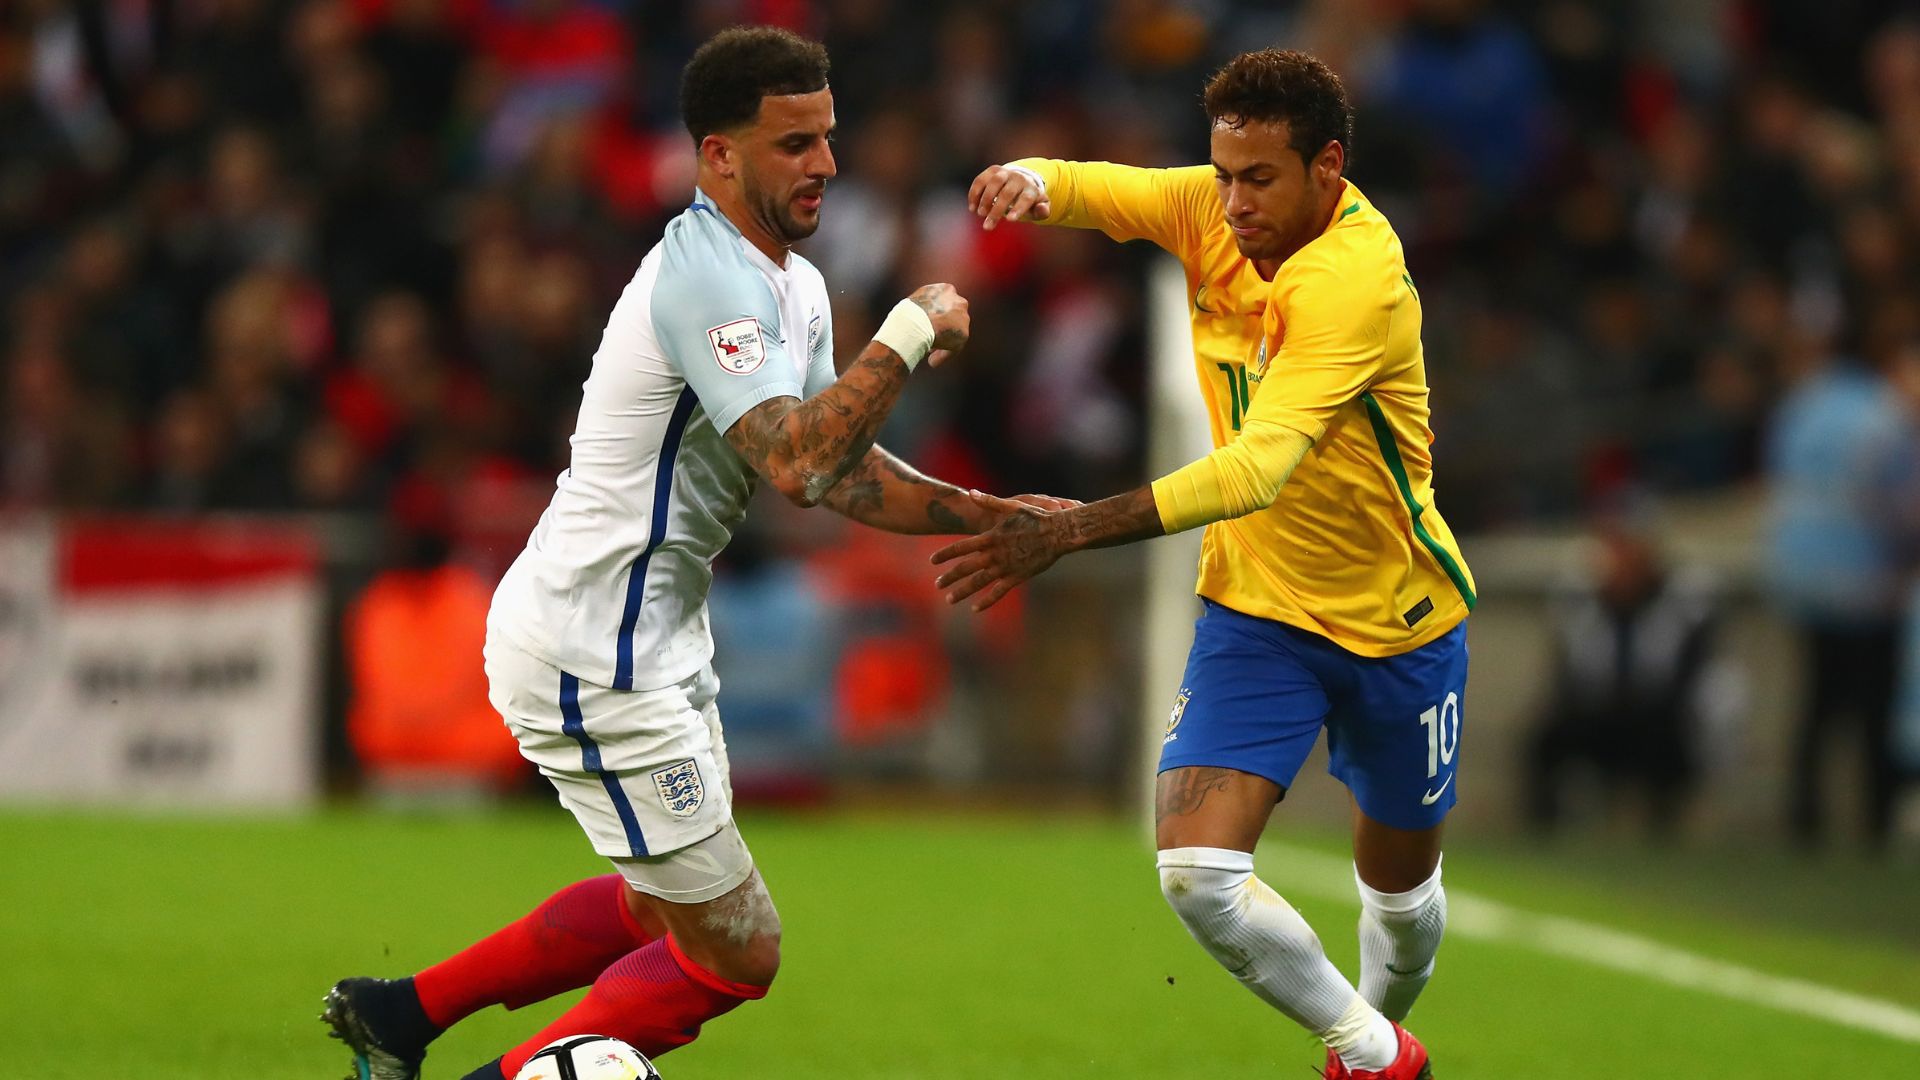 Neymar and Walker in the last game between Brazil and England, in 2017 (Credit: Getty Images)